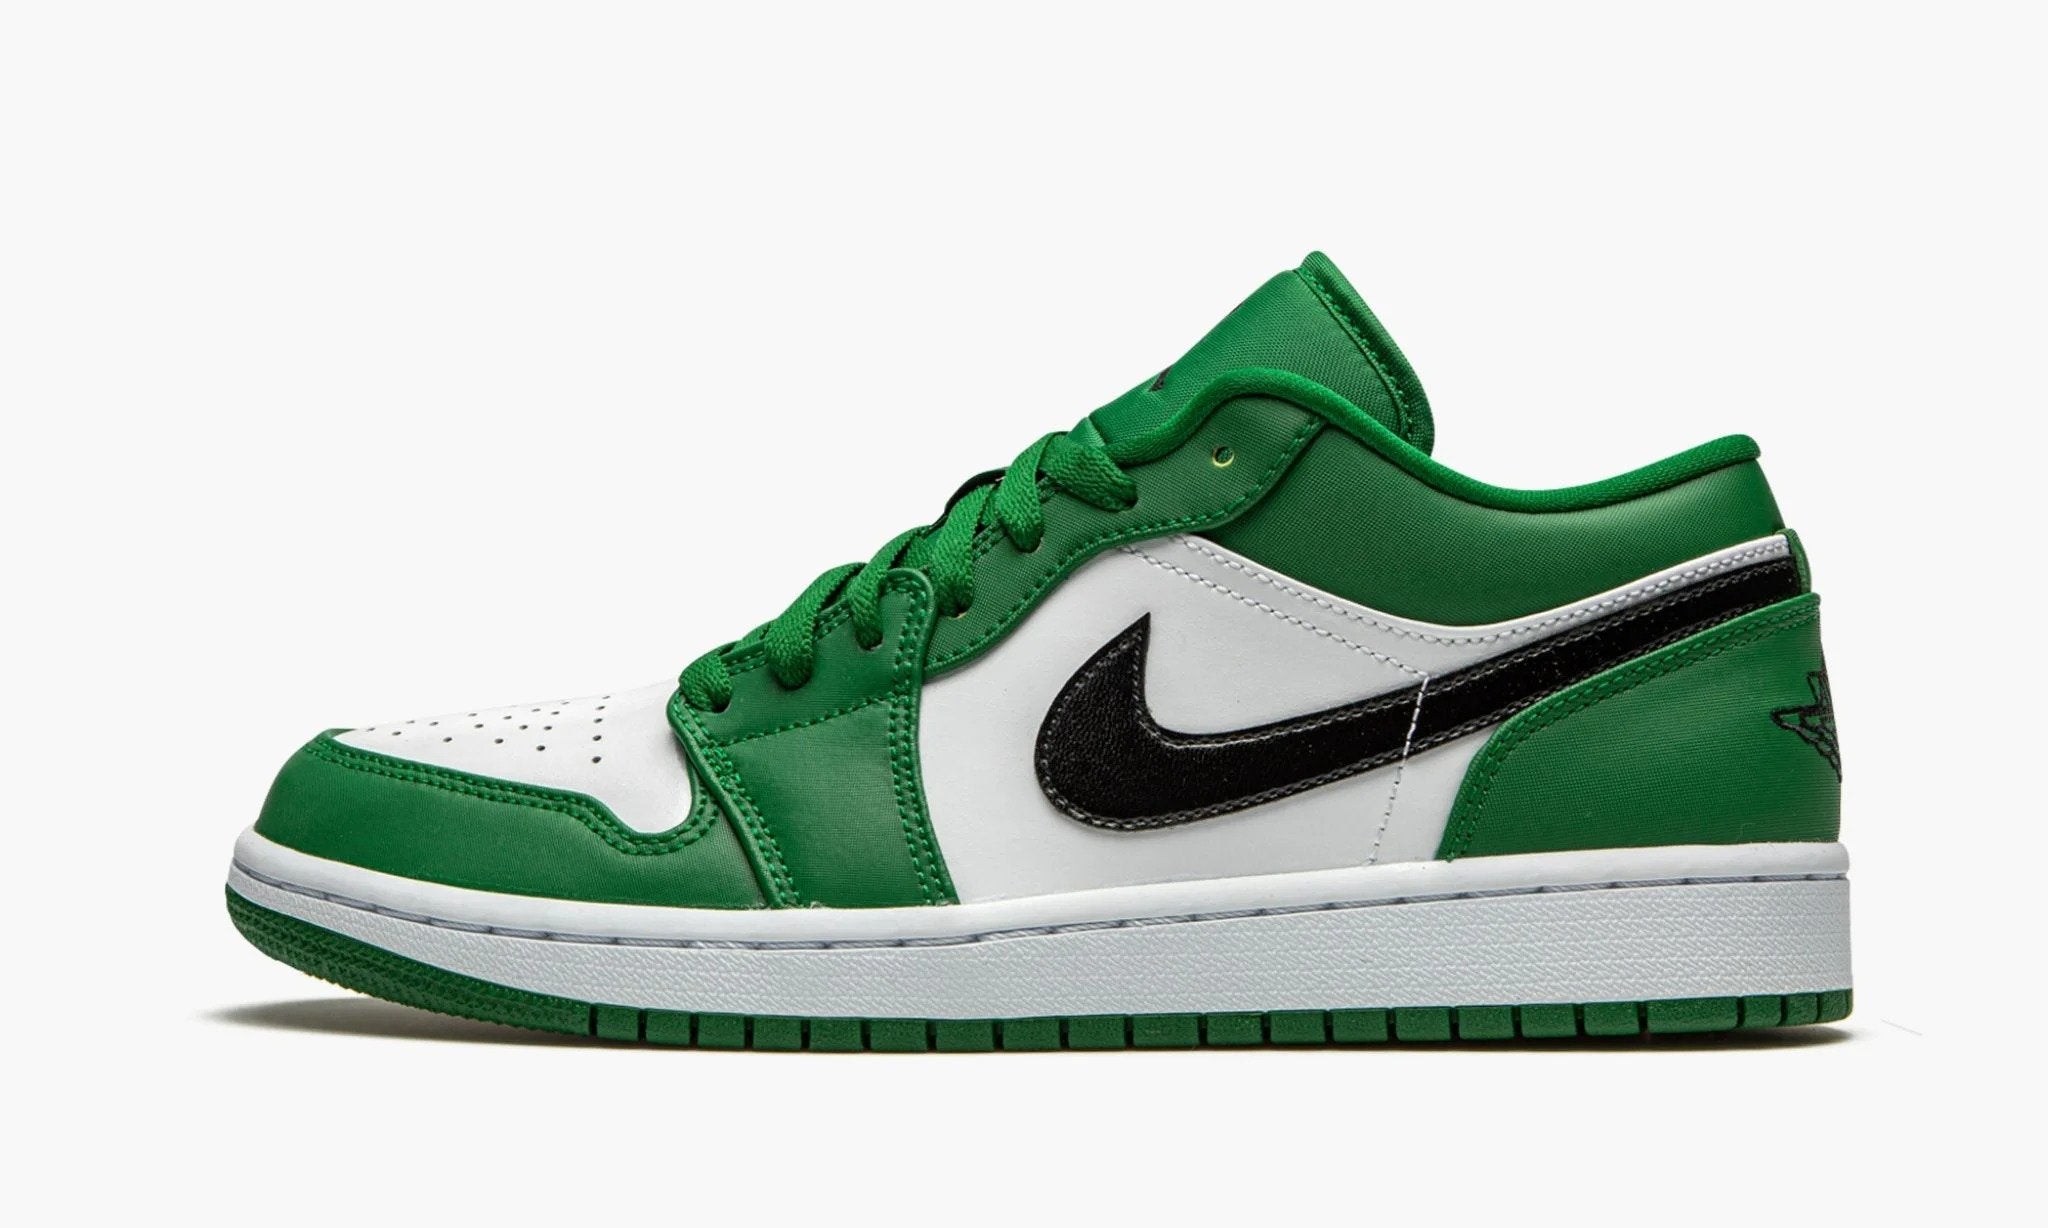 green and white low top jordans